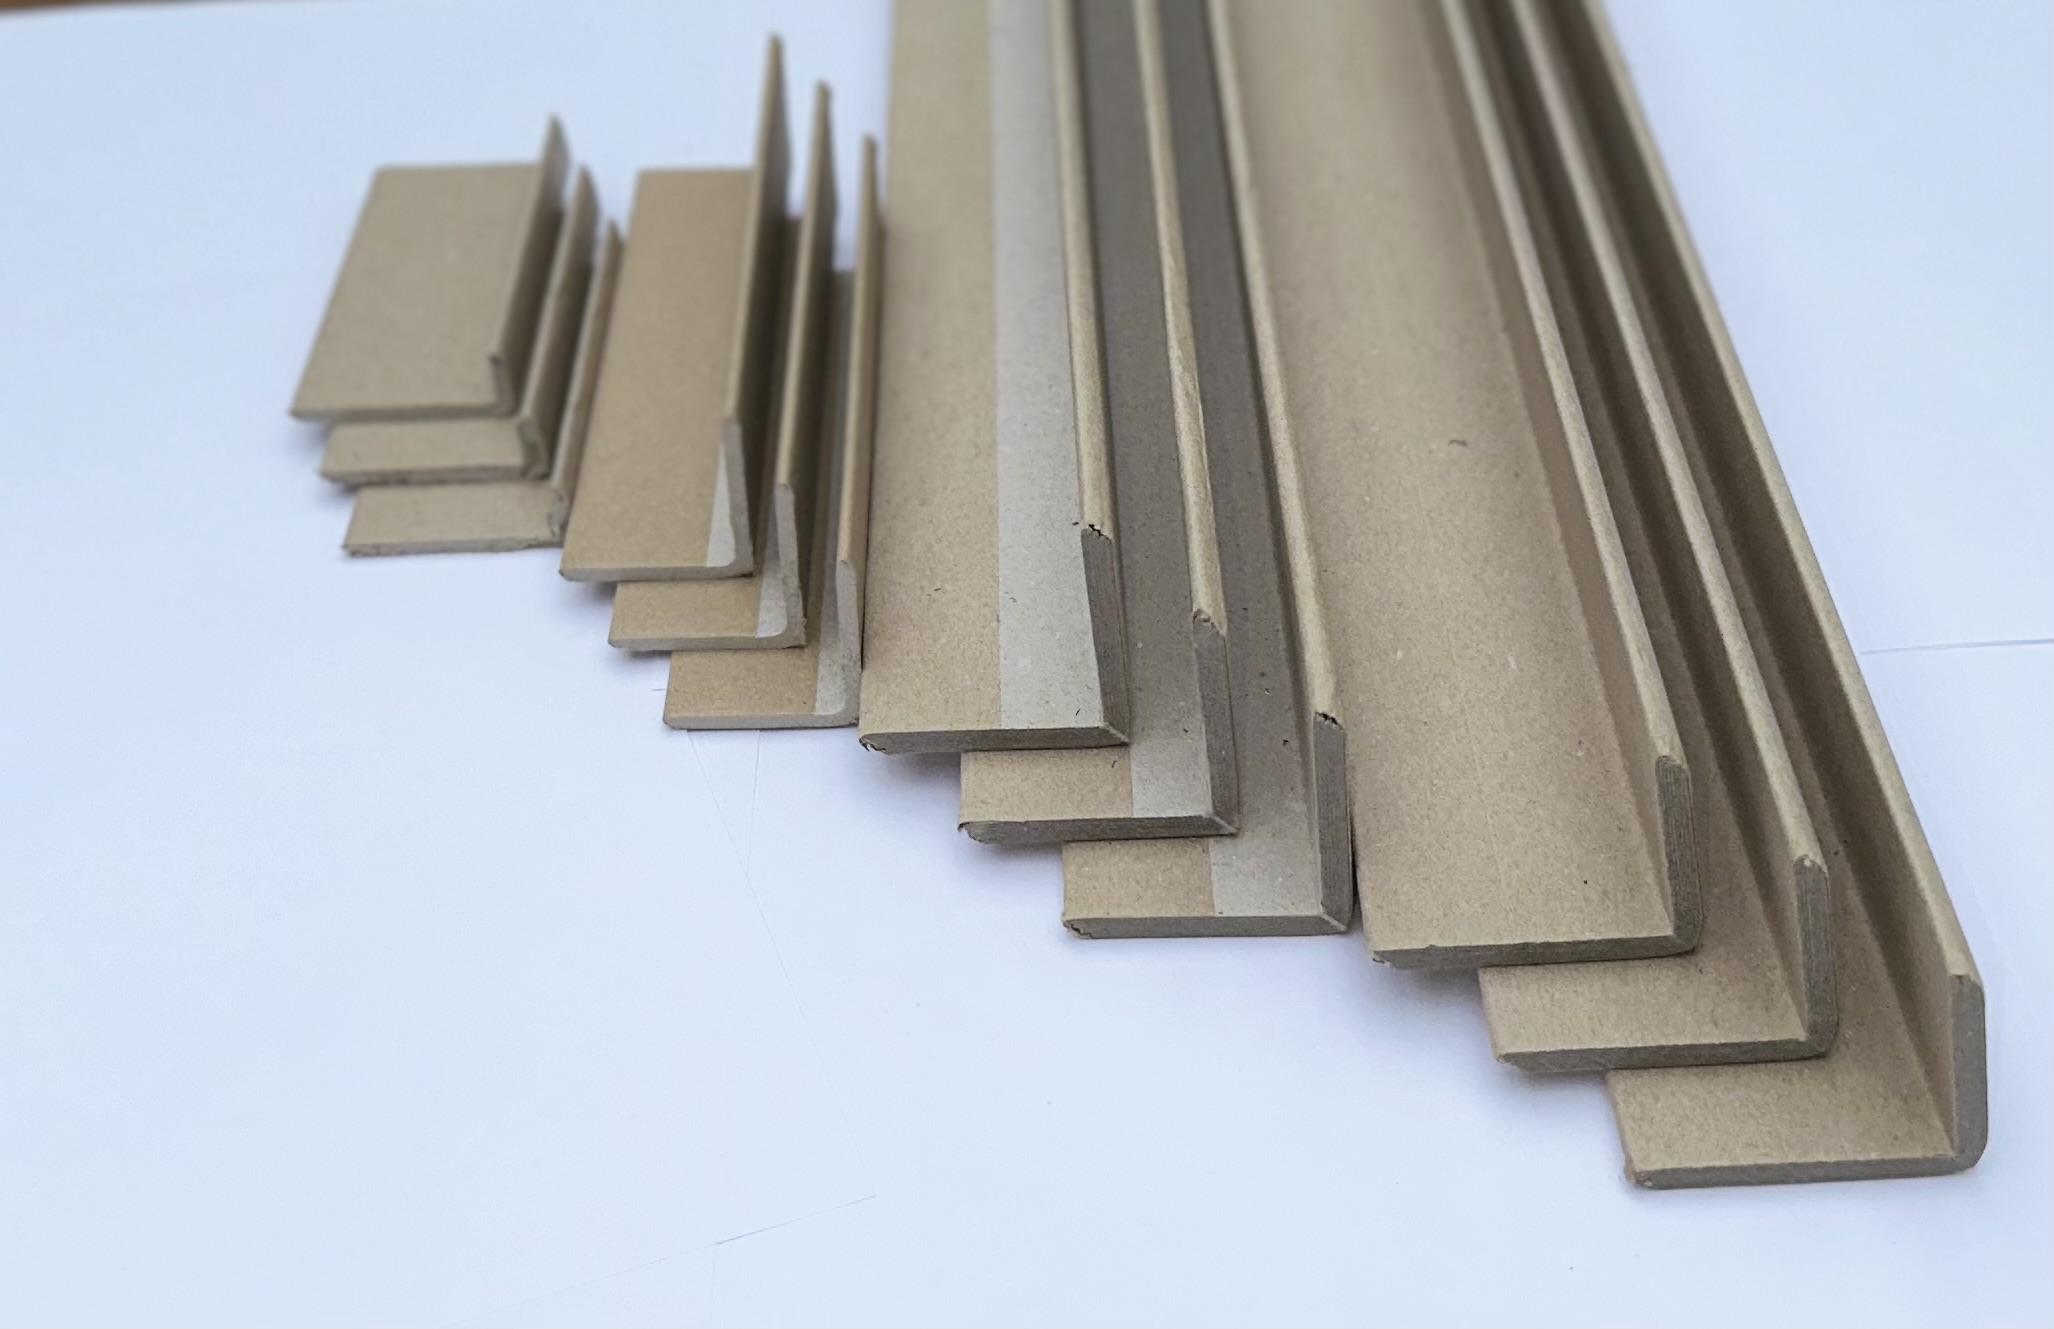 Kartonnage Joye’s cardboard corner protectors play a crucial, vital part in any logistics system for freight transport and warehousing.